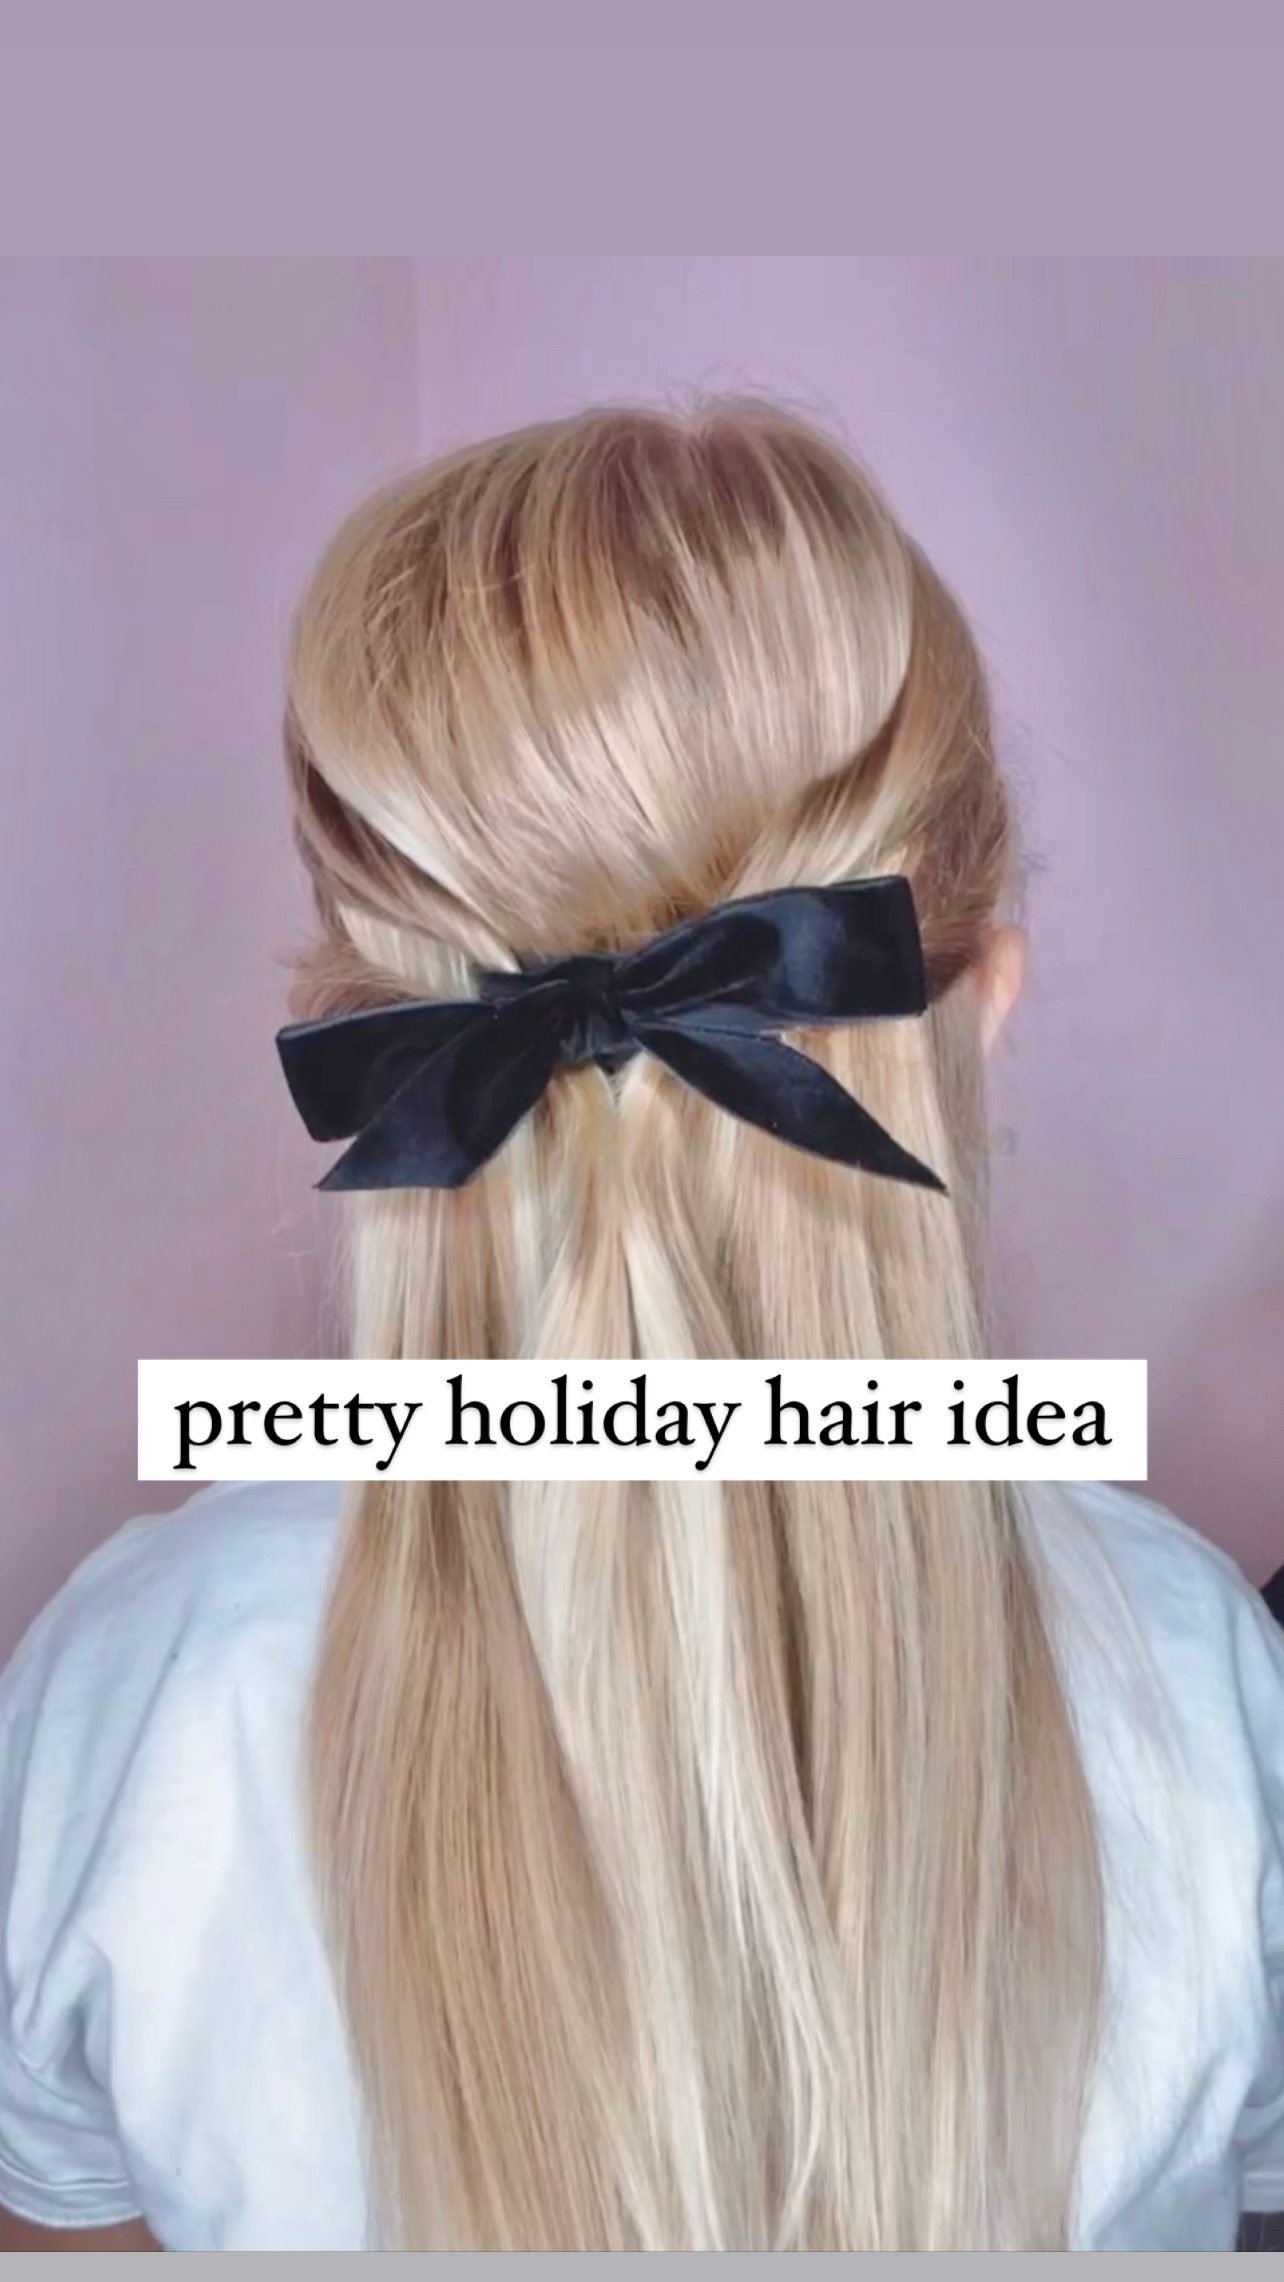 13 Scrunchie Hairstyles with our KB Scrunchies